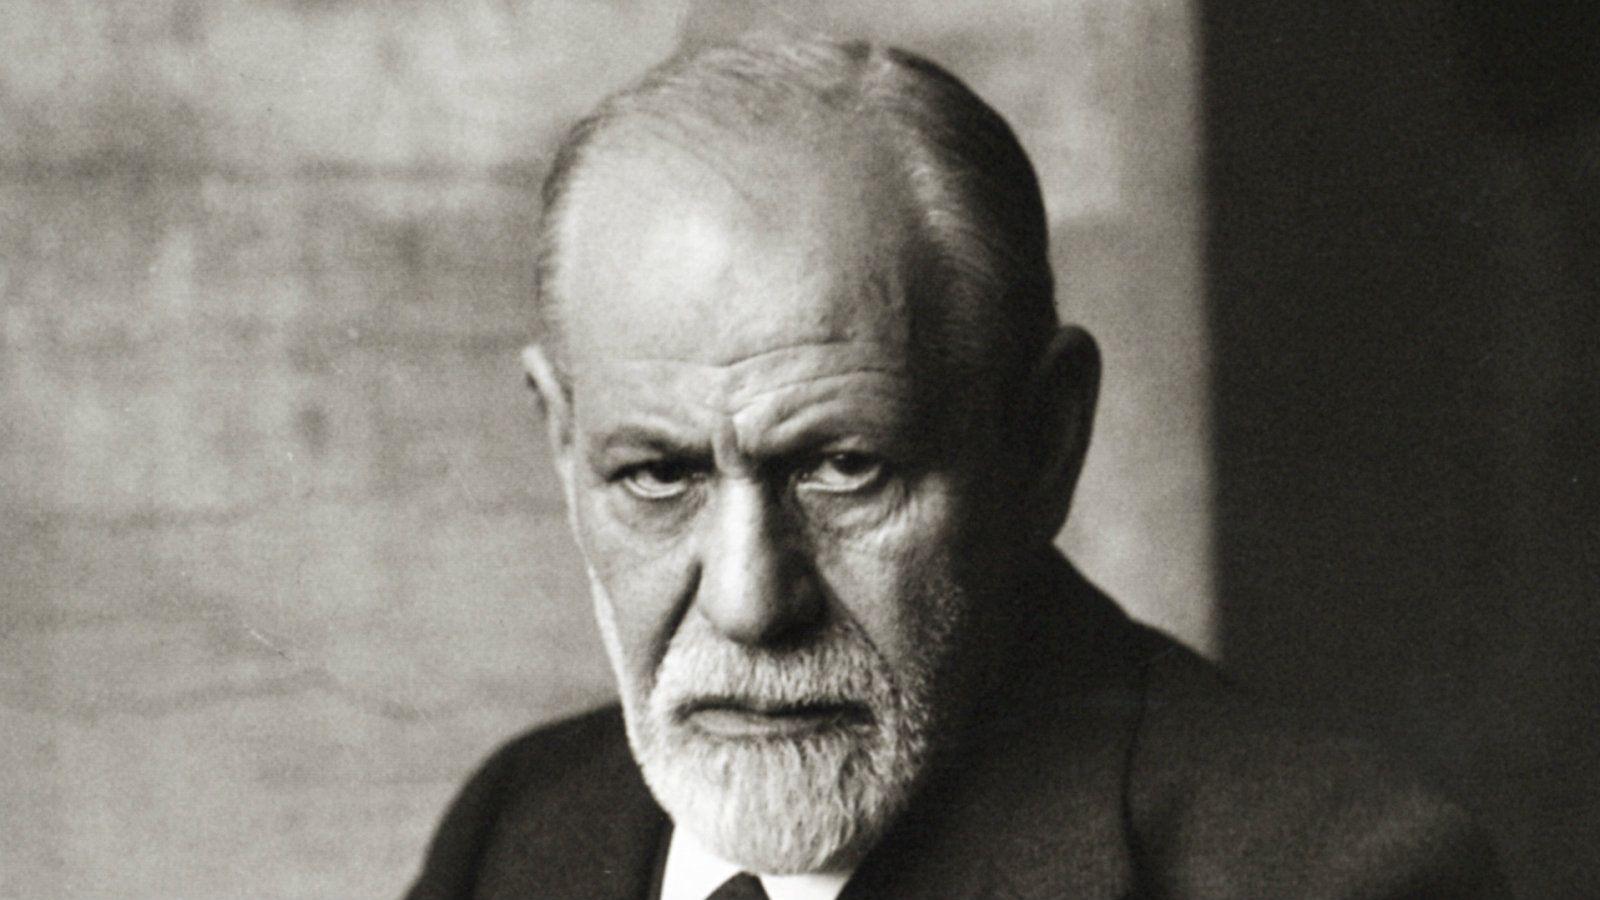 Growing research in neuroscience shows Freud's idea of a superego